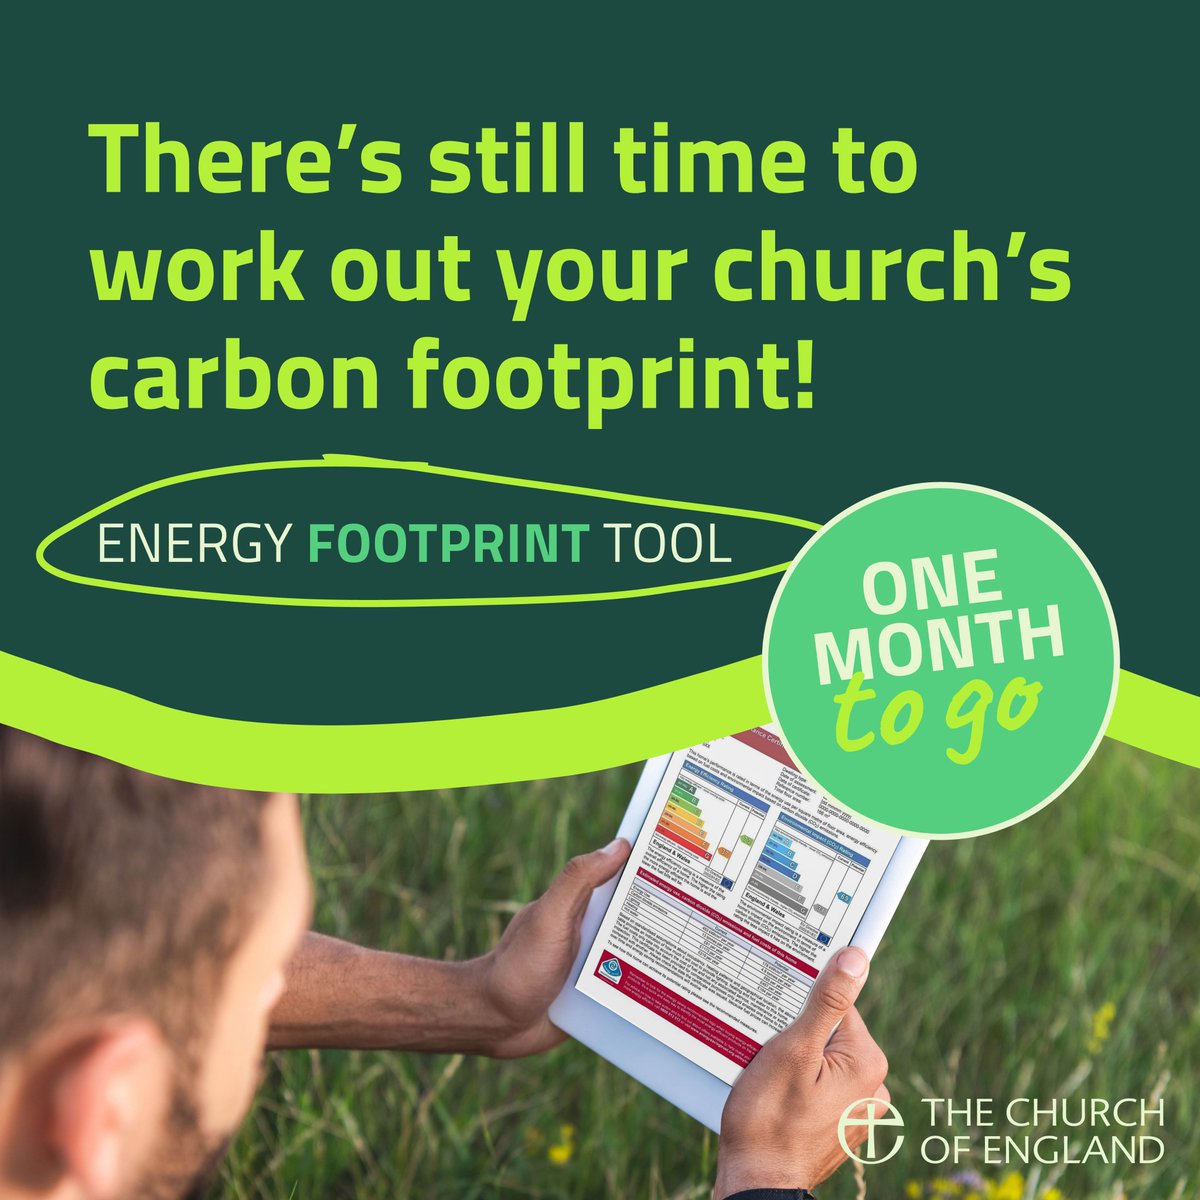 Parishes are requested to enter fuel and power use from 2023 using the Energy Footprint Tool. This helps the Diocese of Chester assess which churches need help carrying out the work to take the diocese to Net Zero by 2030. chester.anglican.org/news/energy-fo…